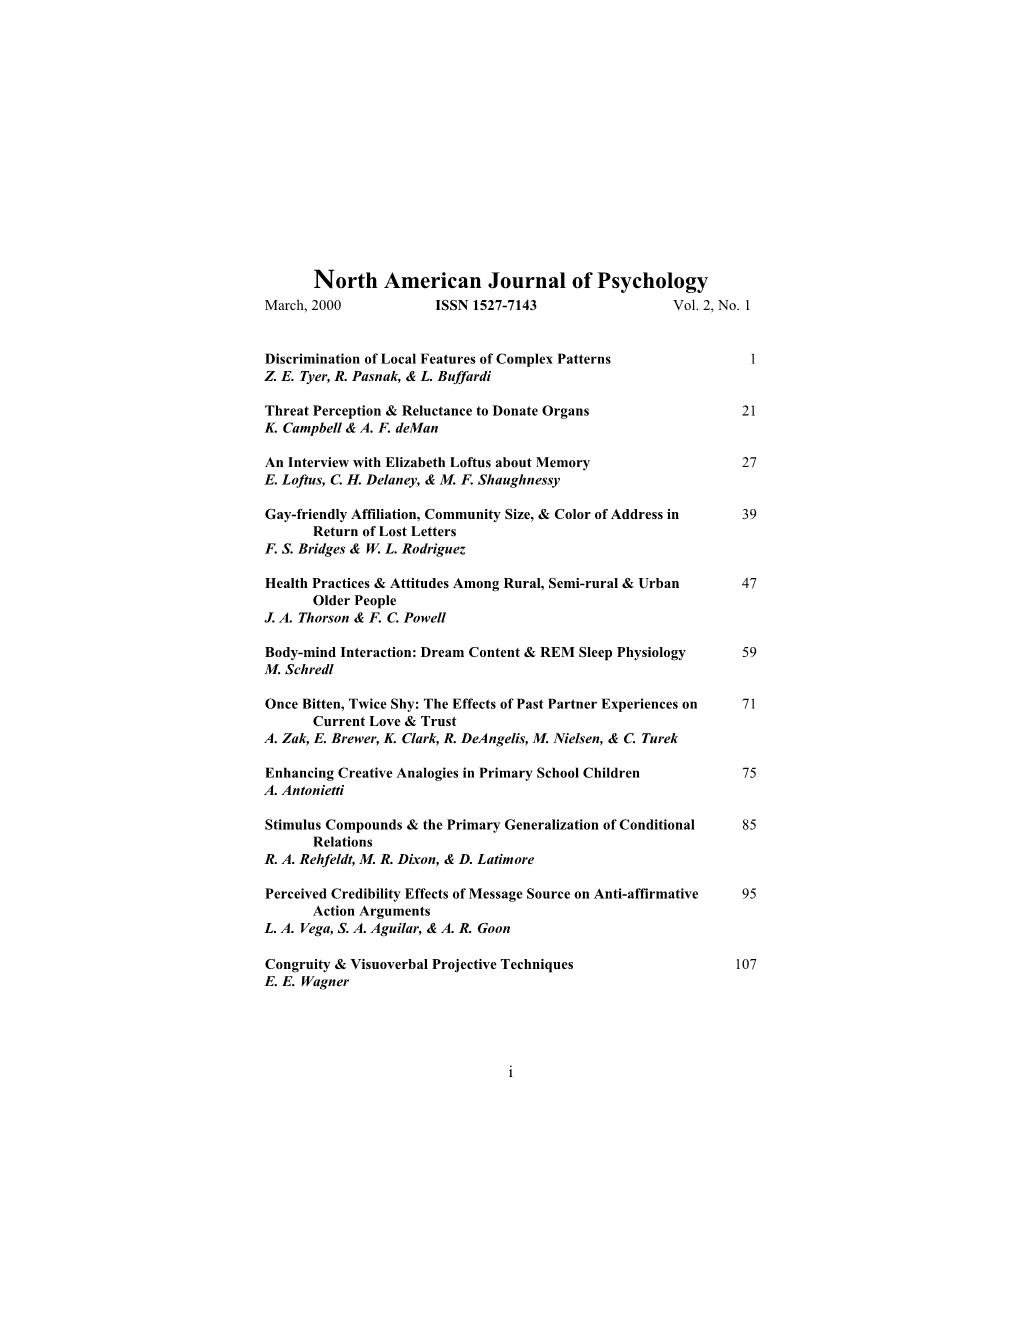 North American Journal of Psychology s2